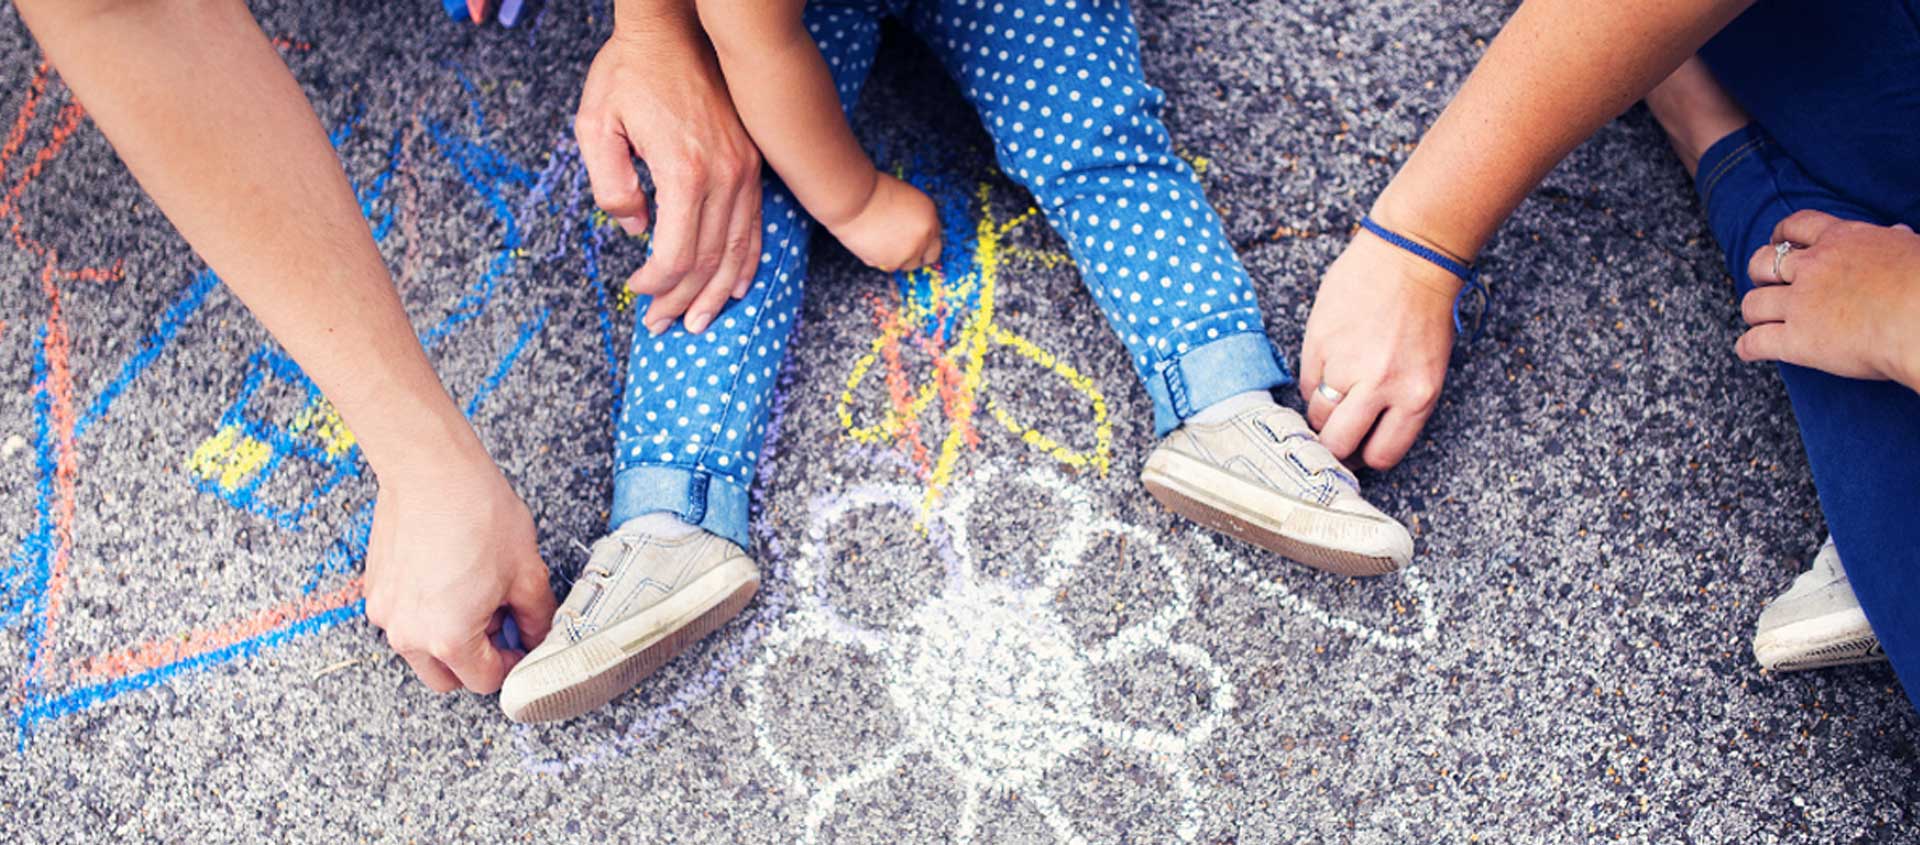 Two adults trace the legs of a preschooler using chalk on pavement.